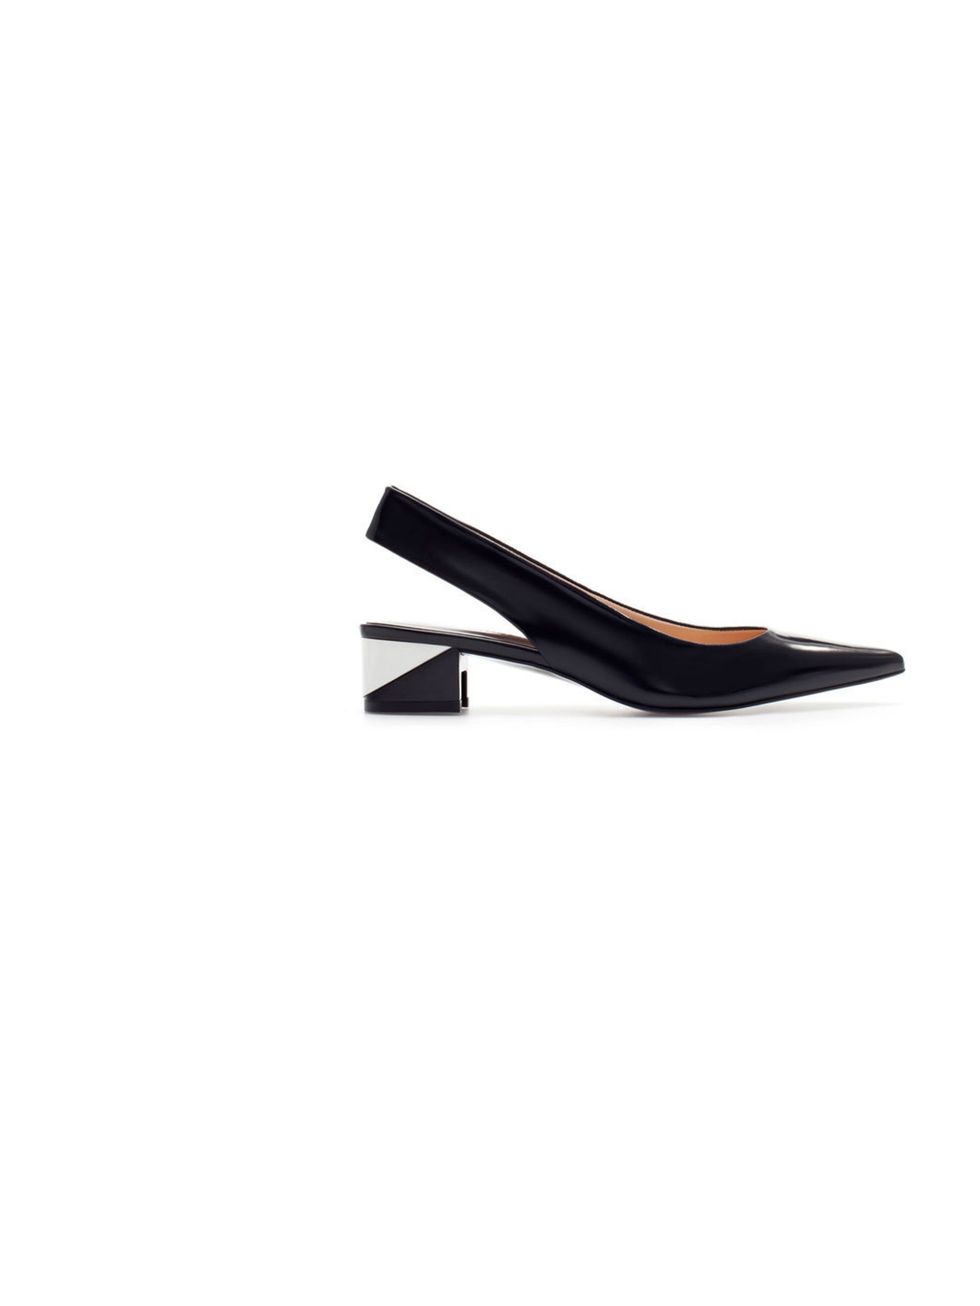 <p>A pair of well-polished black shoes is a menswear staple, and these sleek slingbacks are the perfect womenswear alternative!</p><p><a href="http://www.zara.com/uk/en/woman/shoes/combination-sling-back-c358009p1294570.html">Zara</a> shoes, £59.99</p>